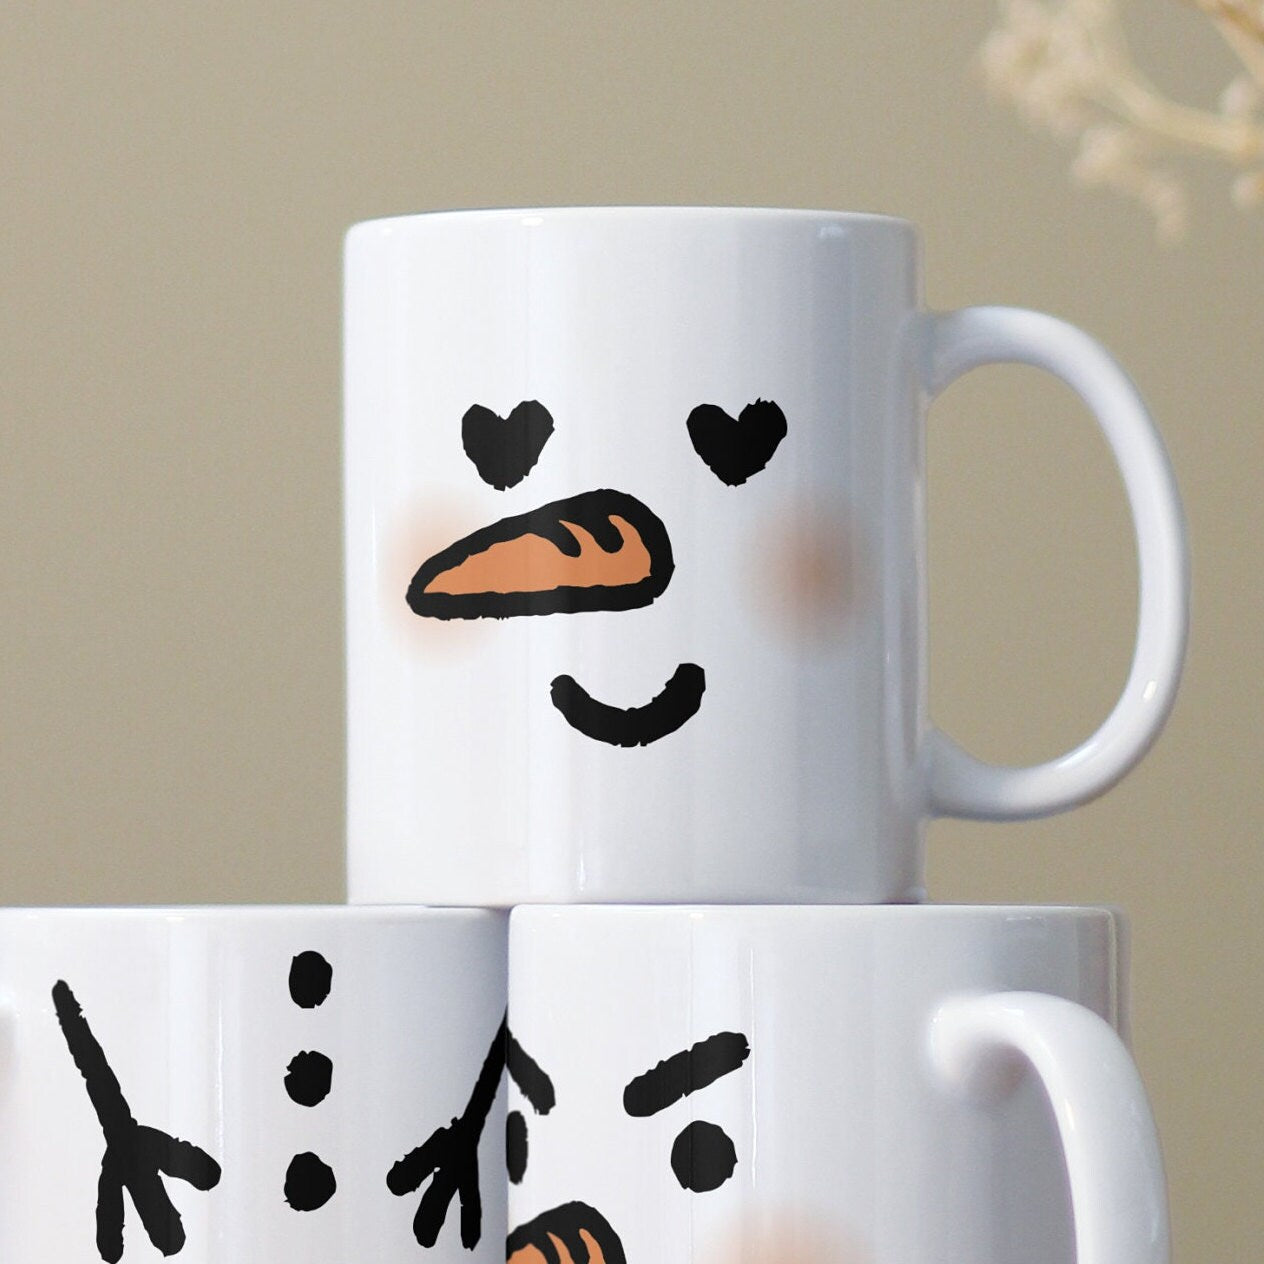 Snowman Mugs with Customized Face & Name | Stackable Marshmallow Snowman Coffee Cups for Personalized Christmas Gifts